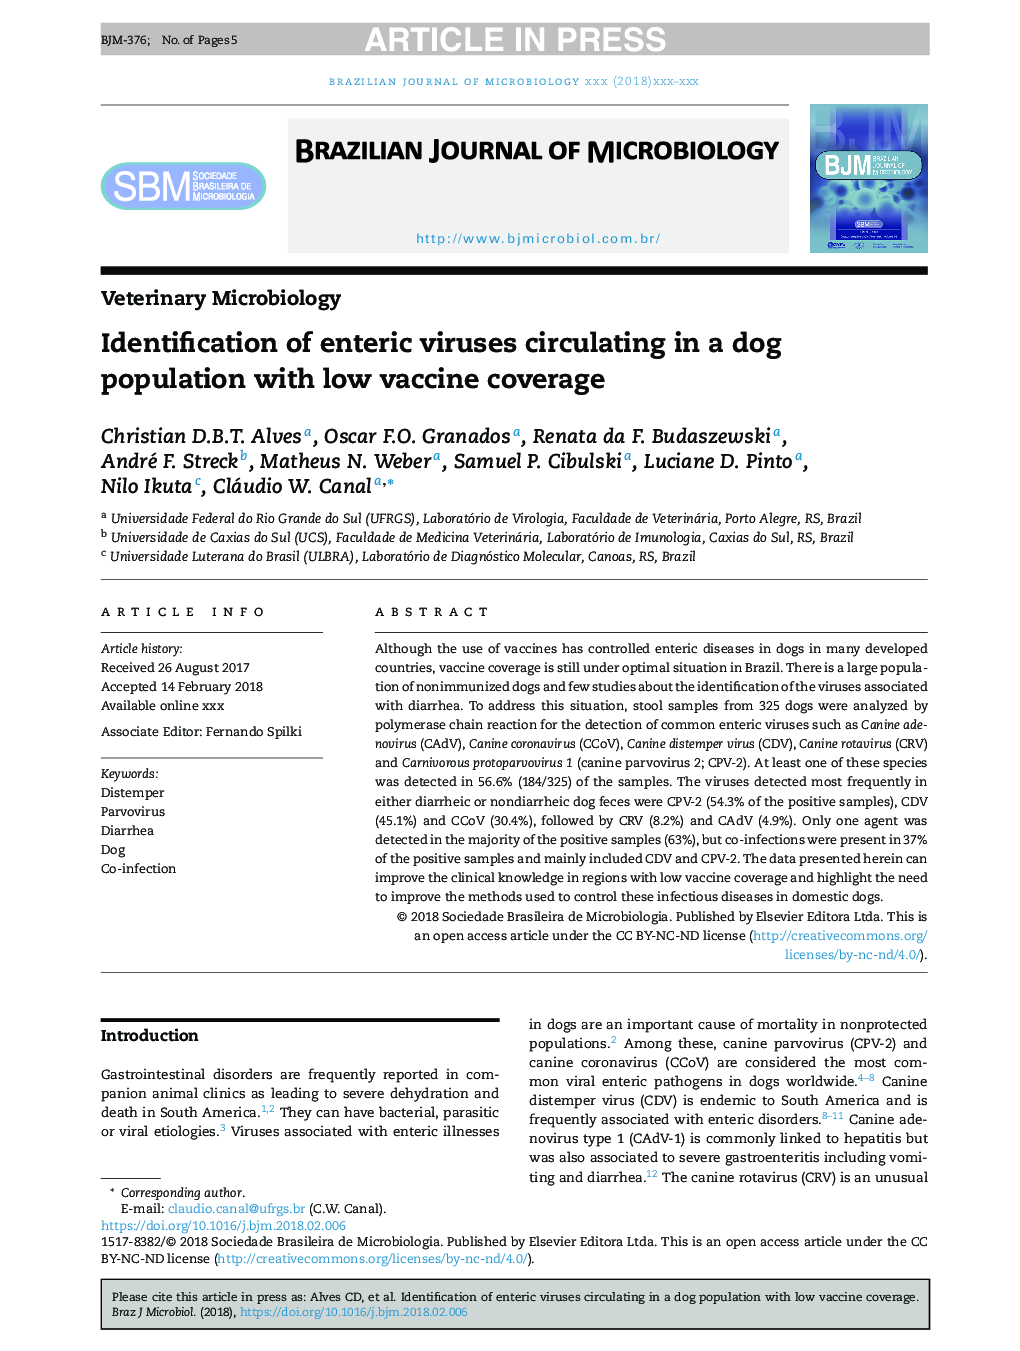 Identification of enteric viruses circulating in a dog population with low vaccine coverage